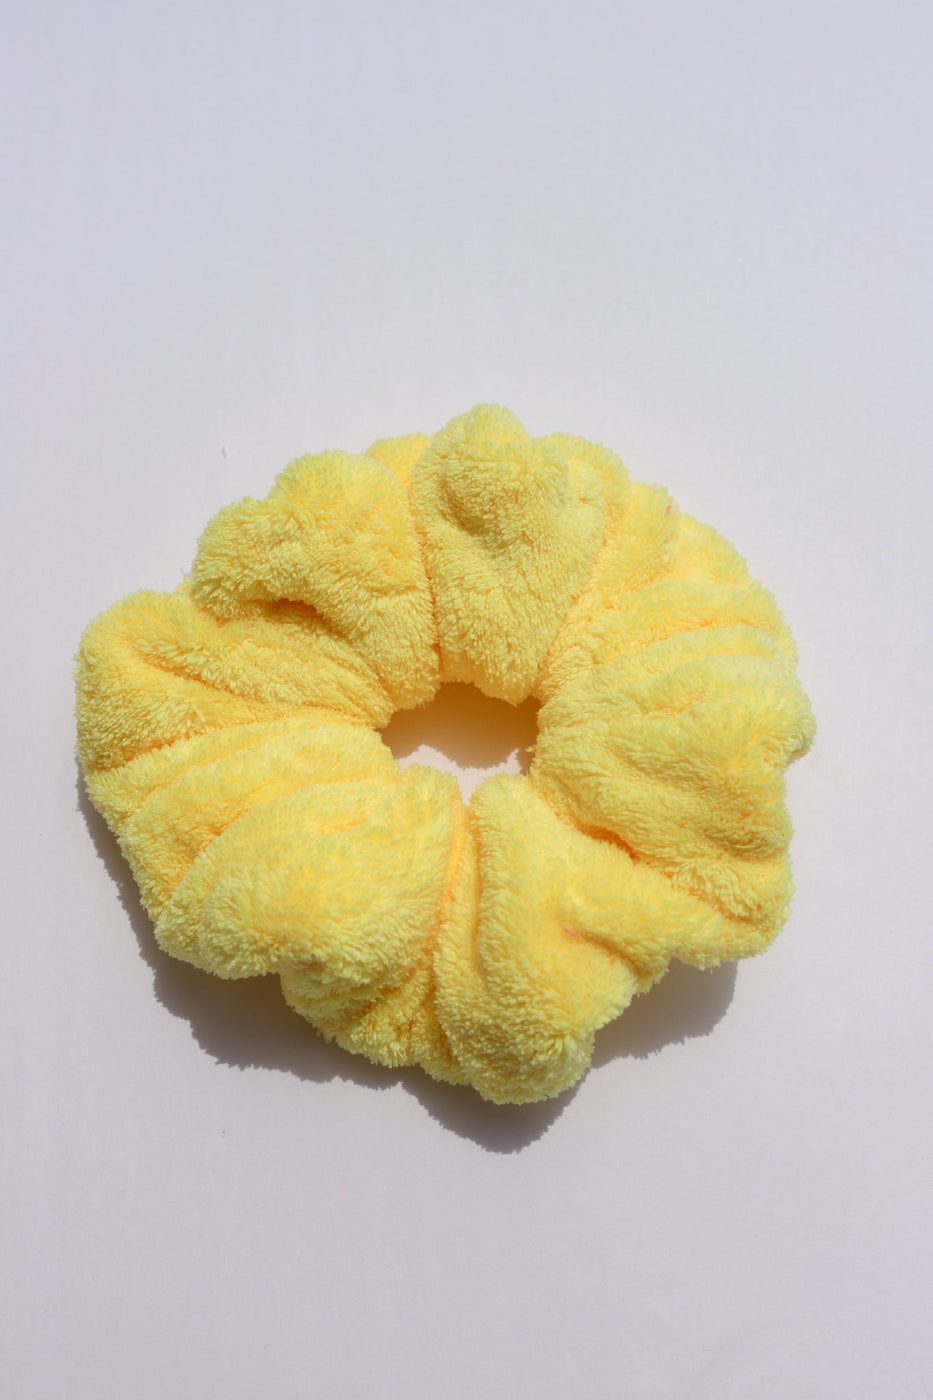 a yellow hair scrunchie on a white surface